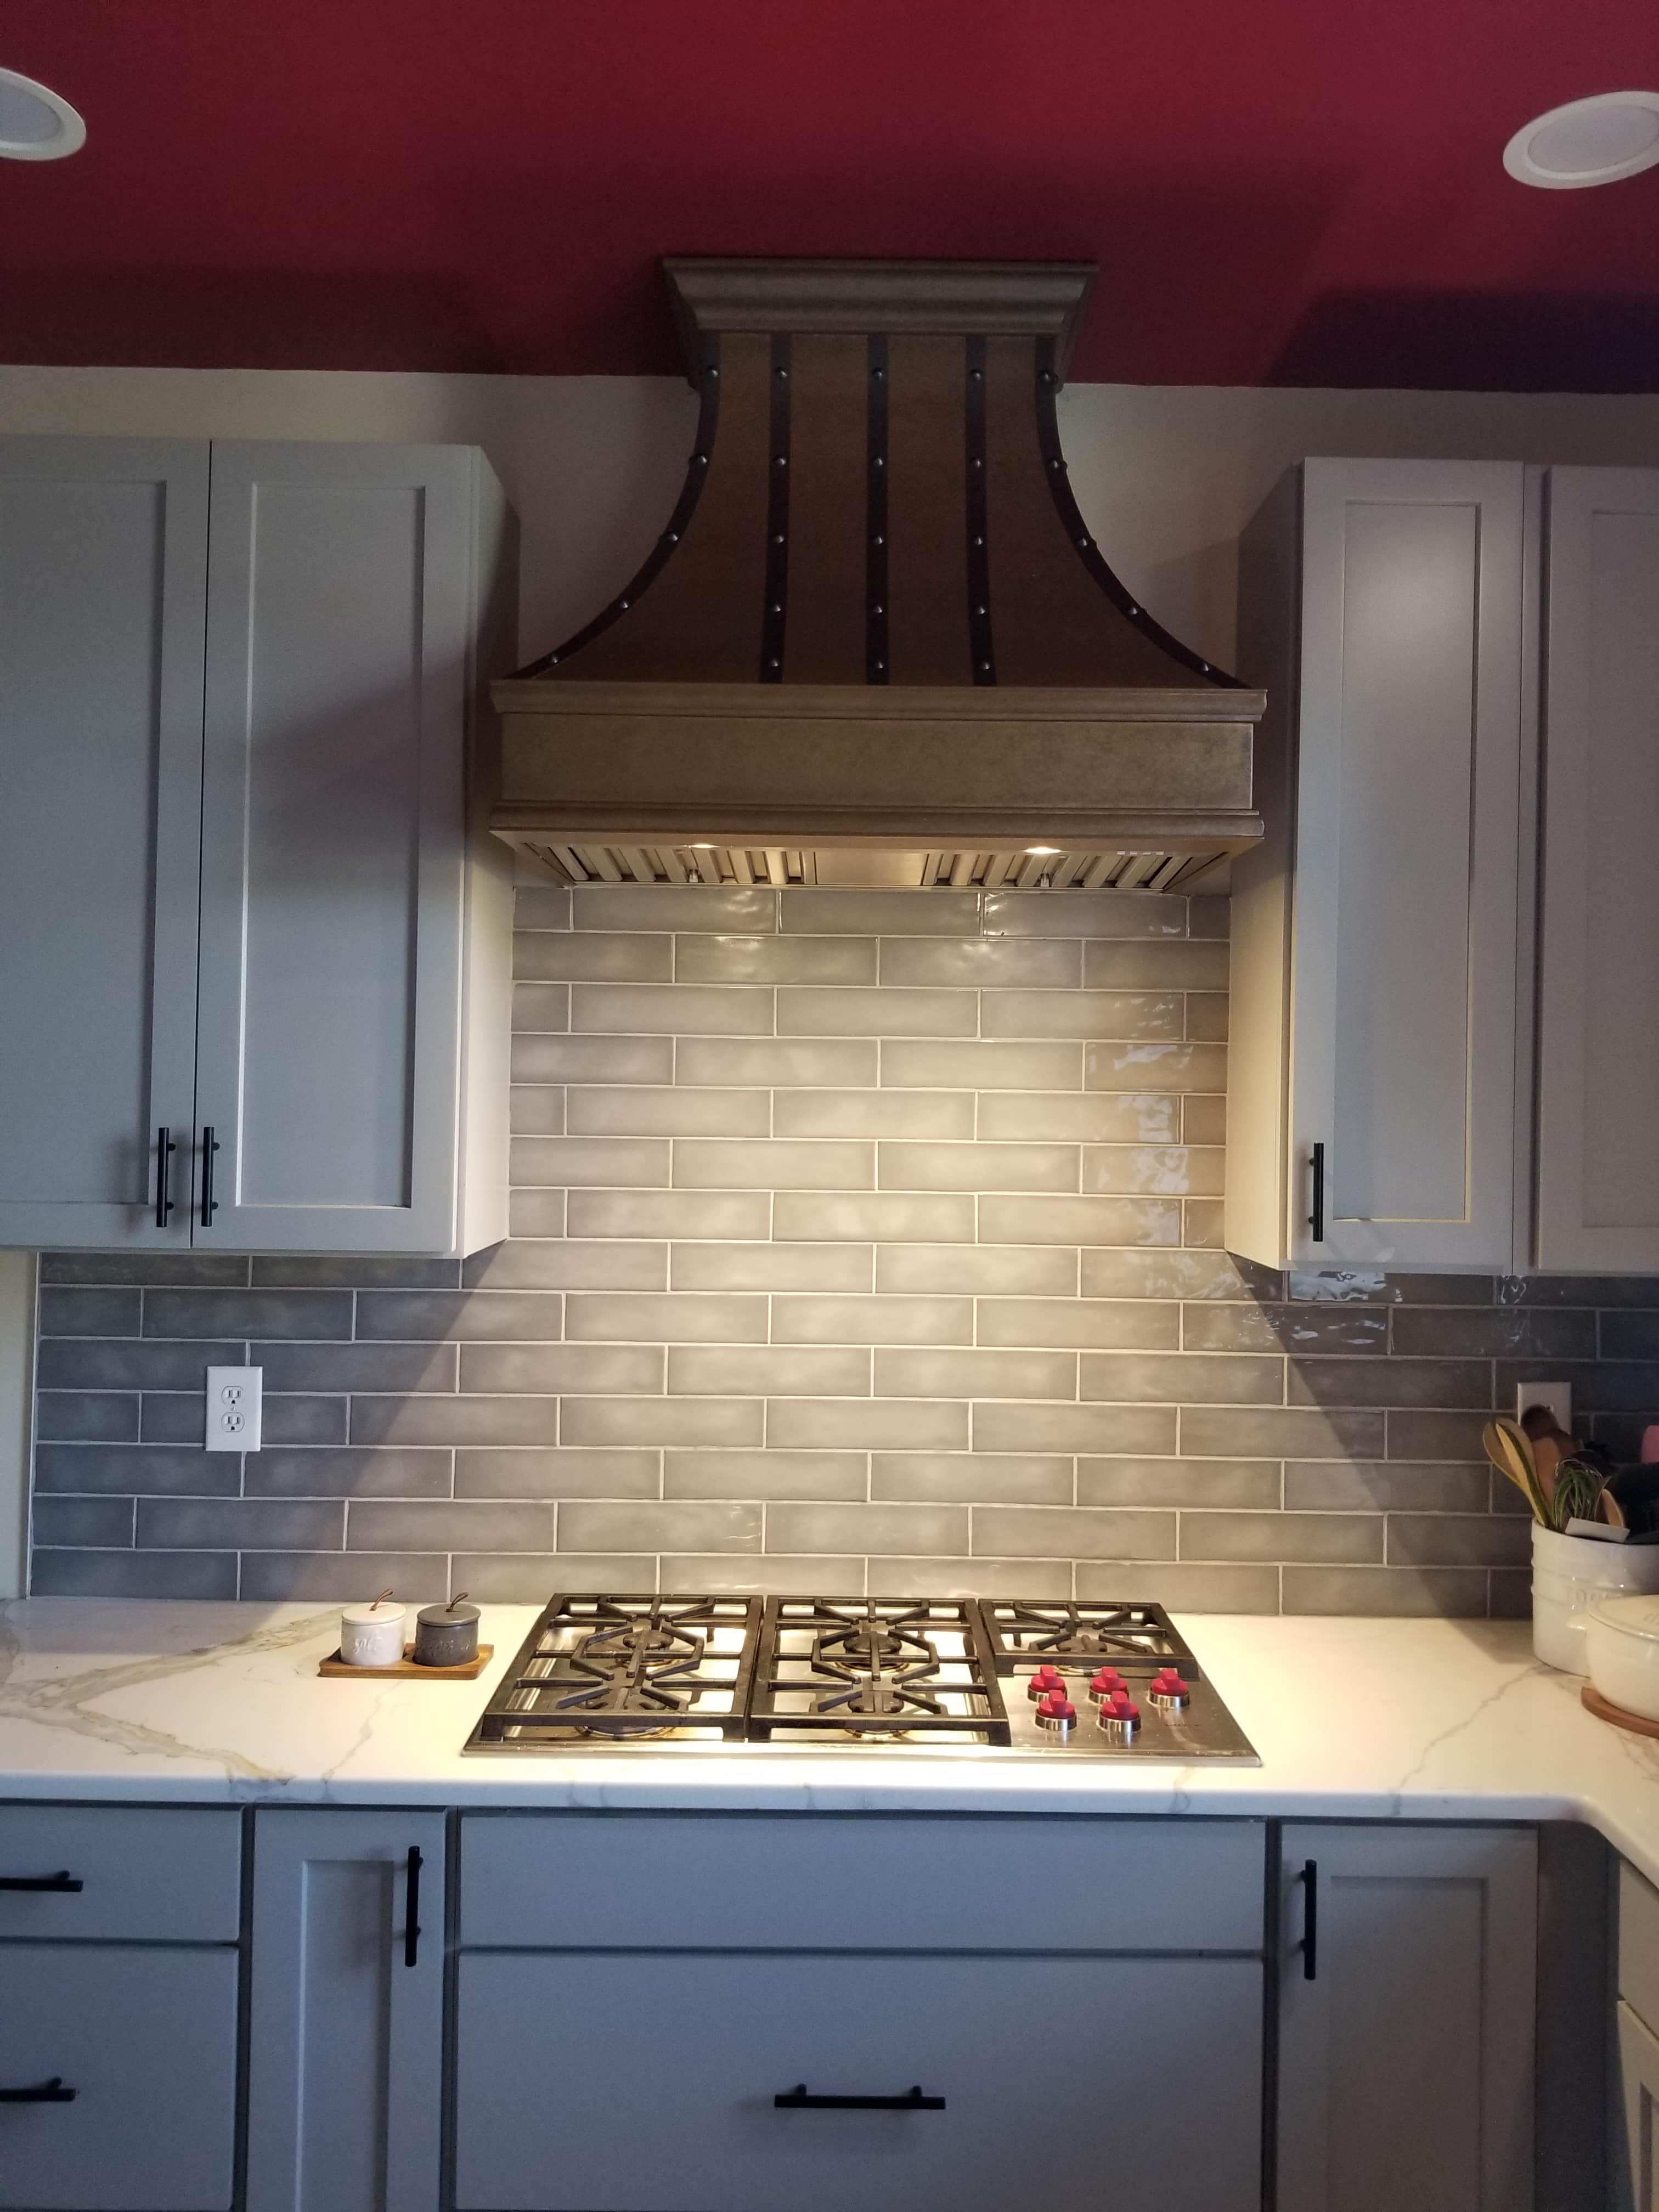 Impeccable range hood choices and classic kitchen planning, white kitchen cabinets and marble kitchen countertops